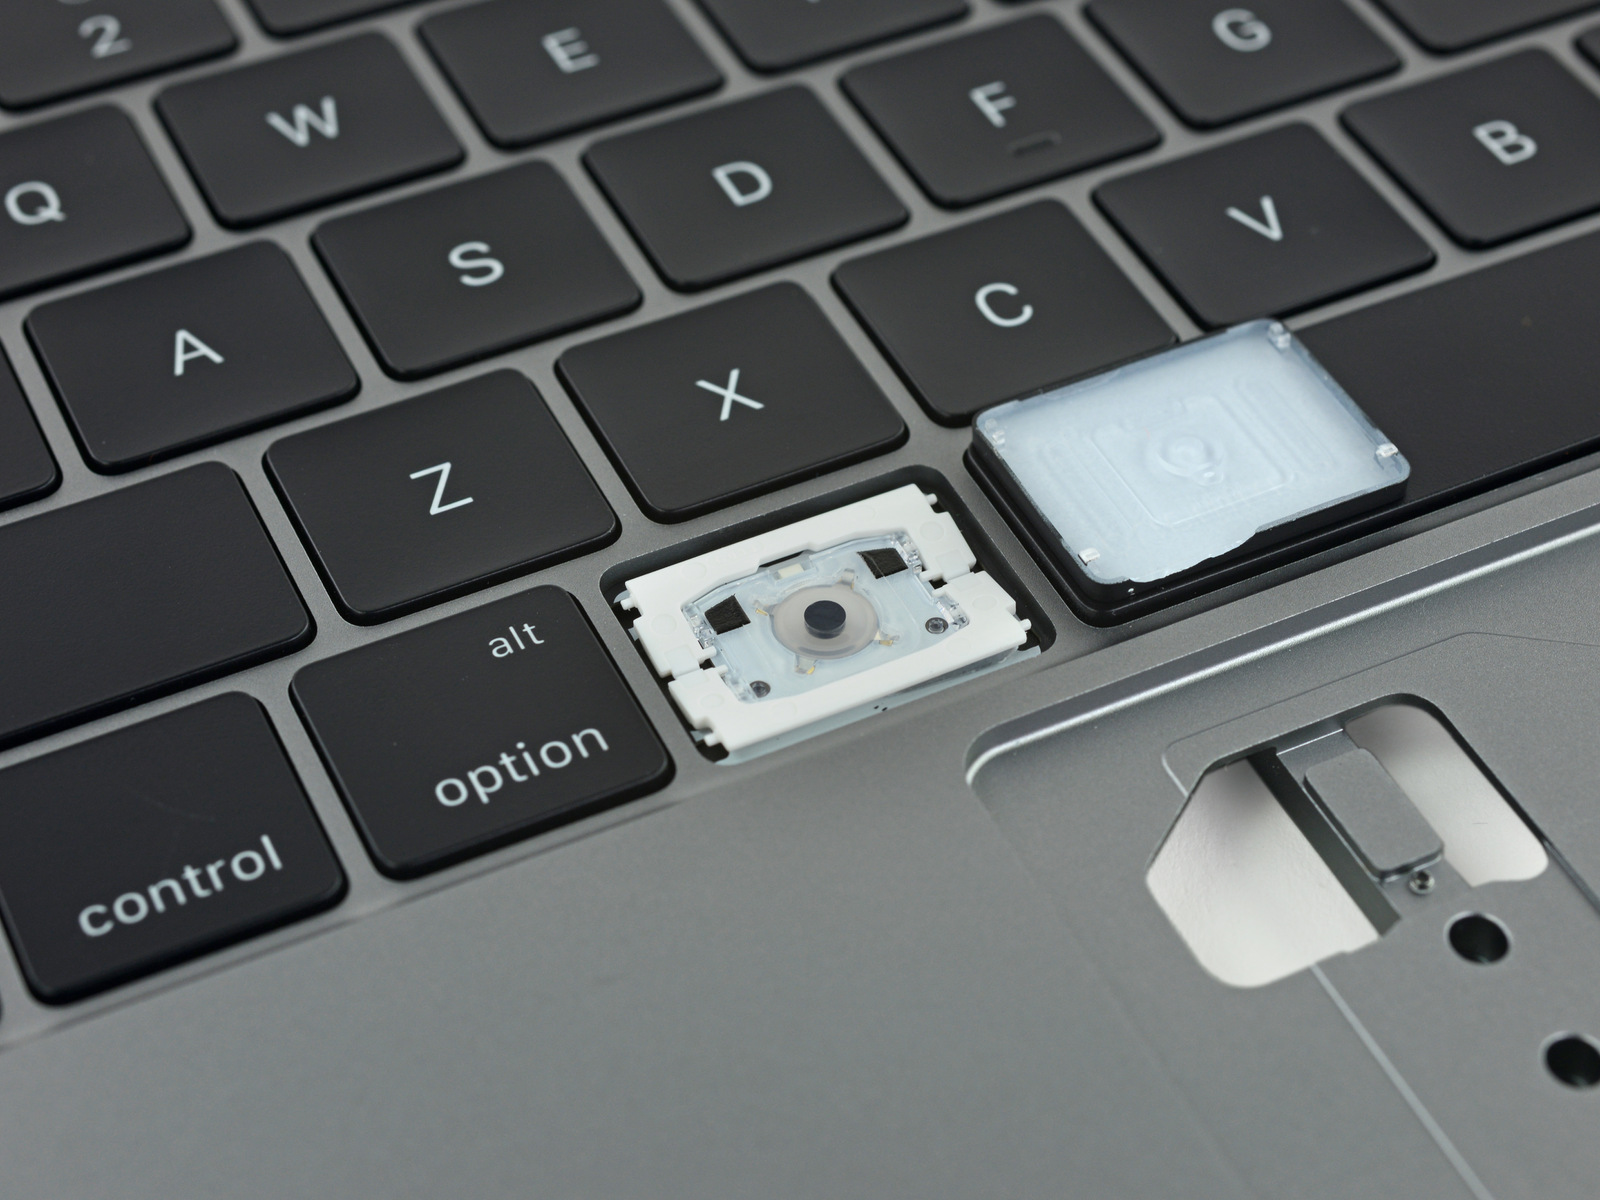 Apple reportedly ready ditch unreliable butterfly switch keyboards in upcoming MacBook laptops - KLGadgetGuy